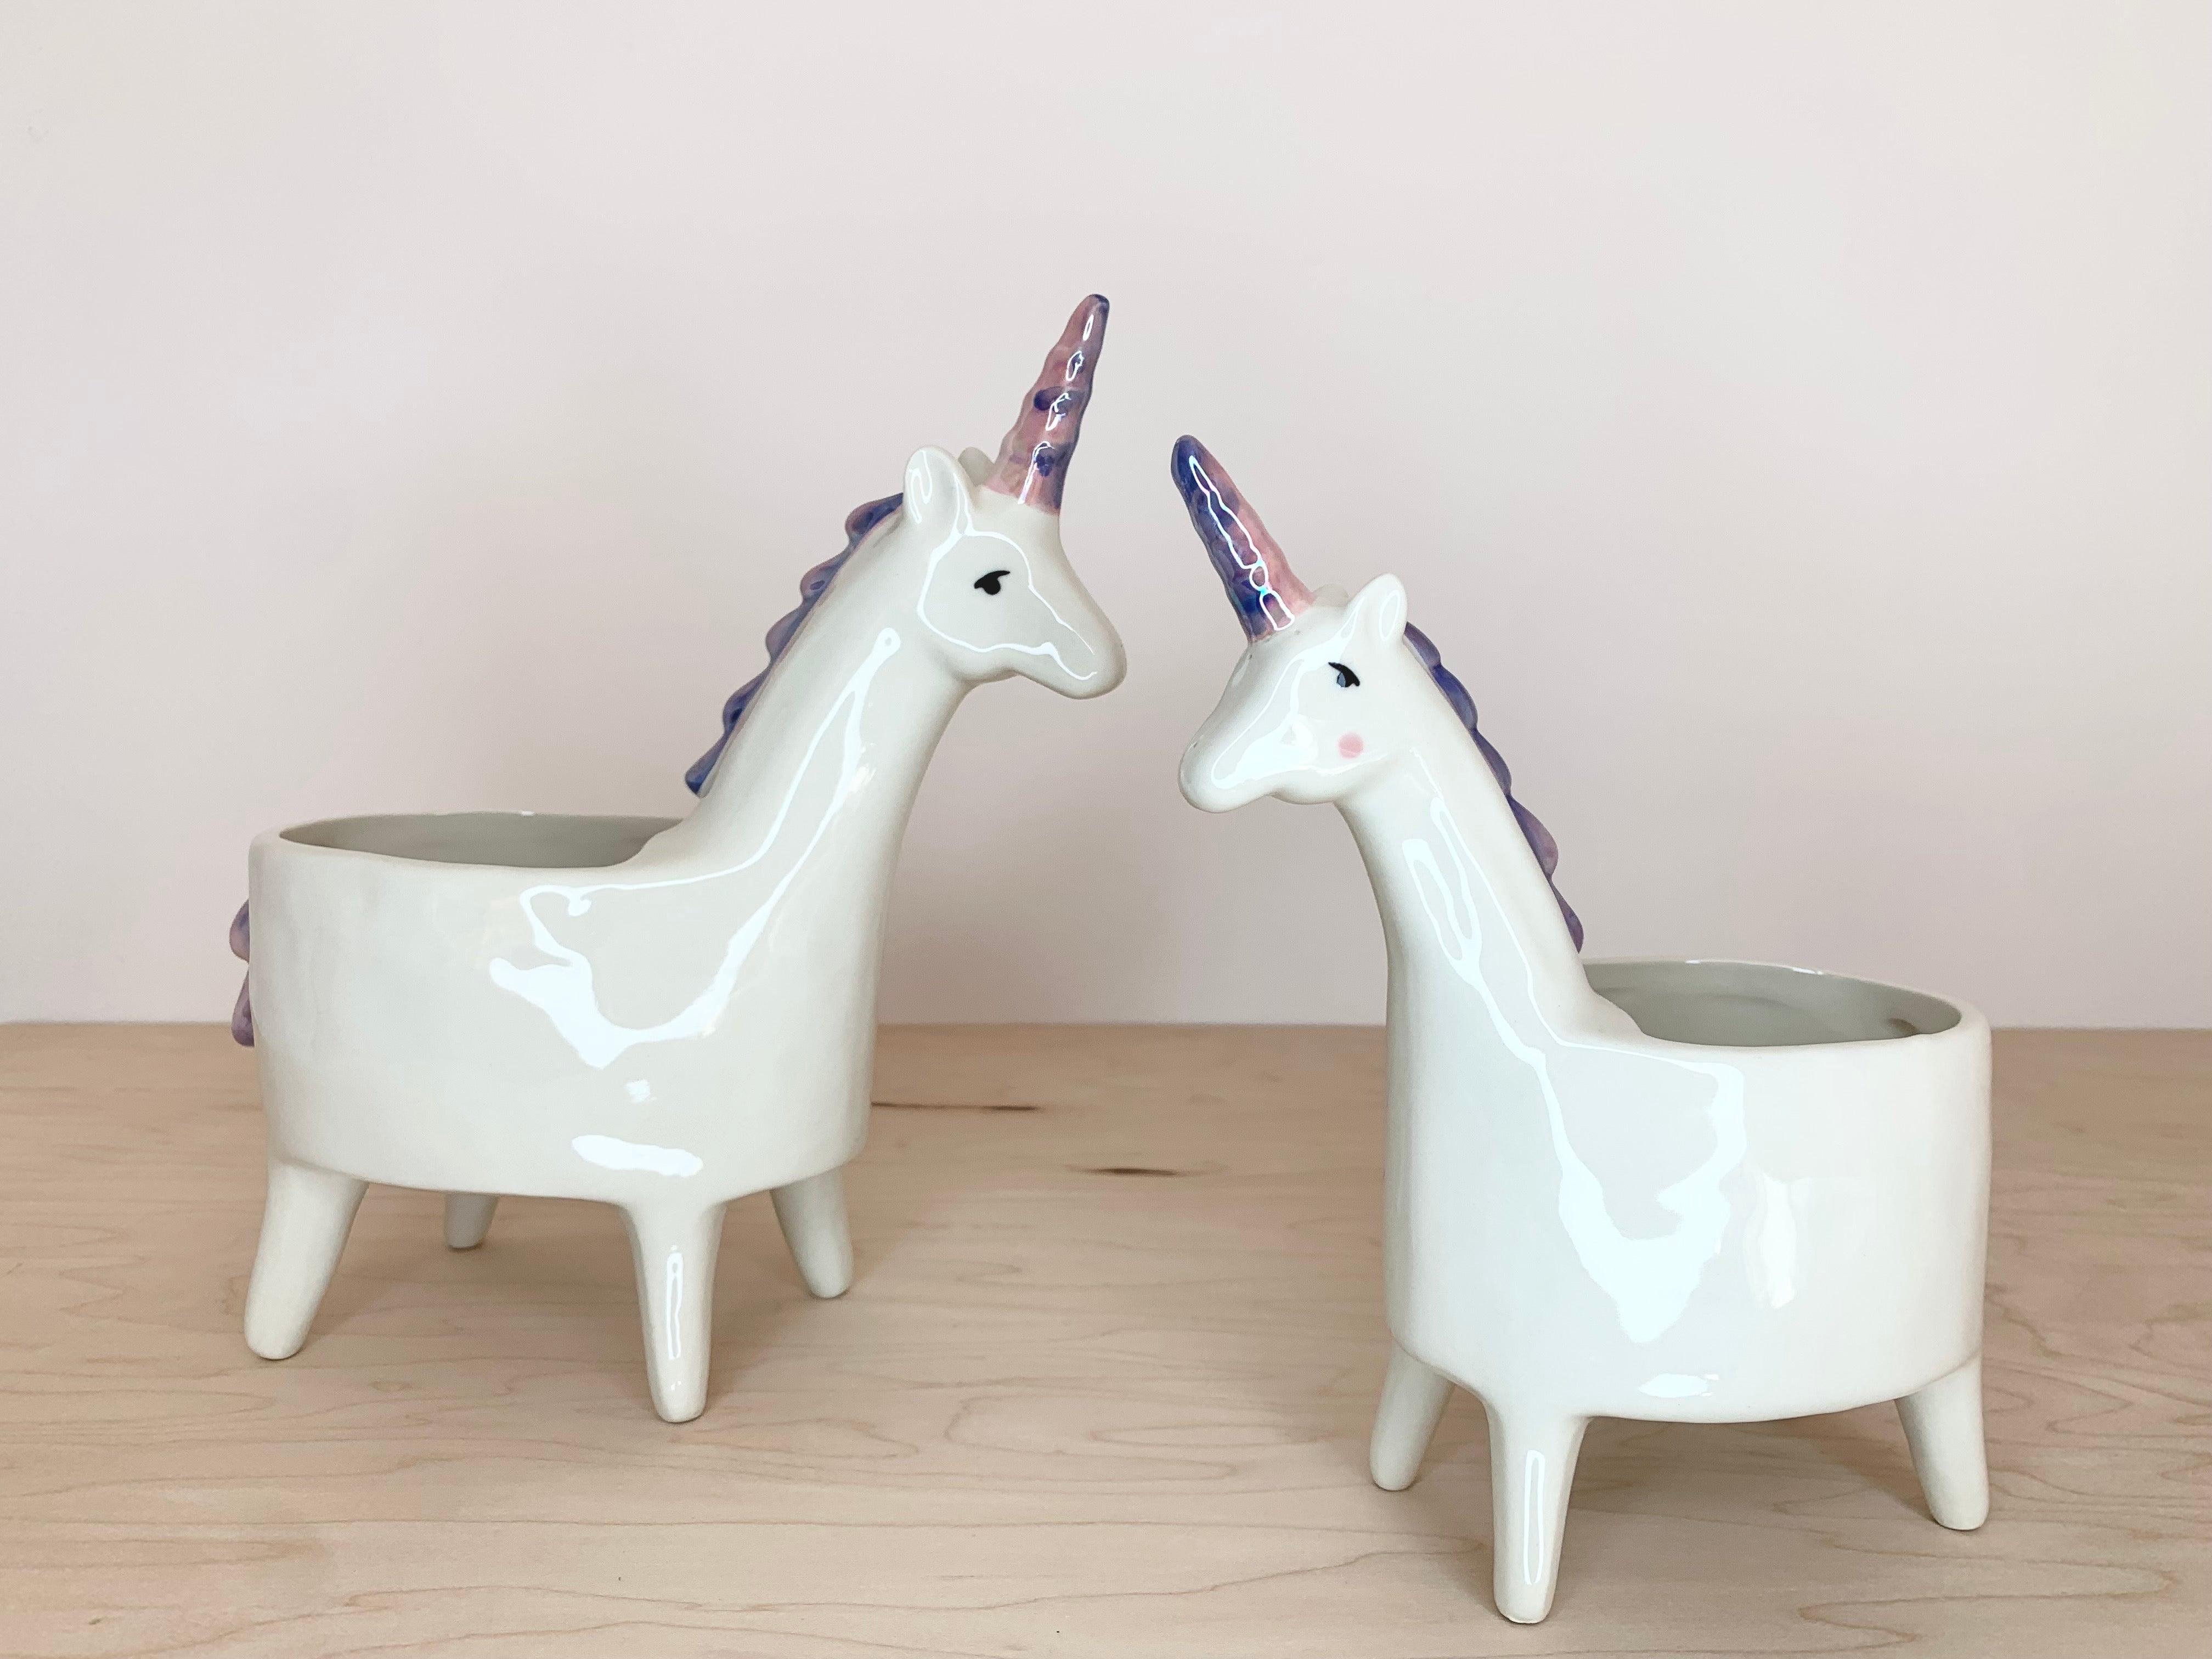 Large and small unicorn planters